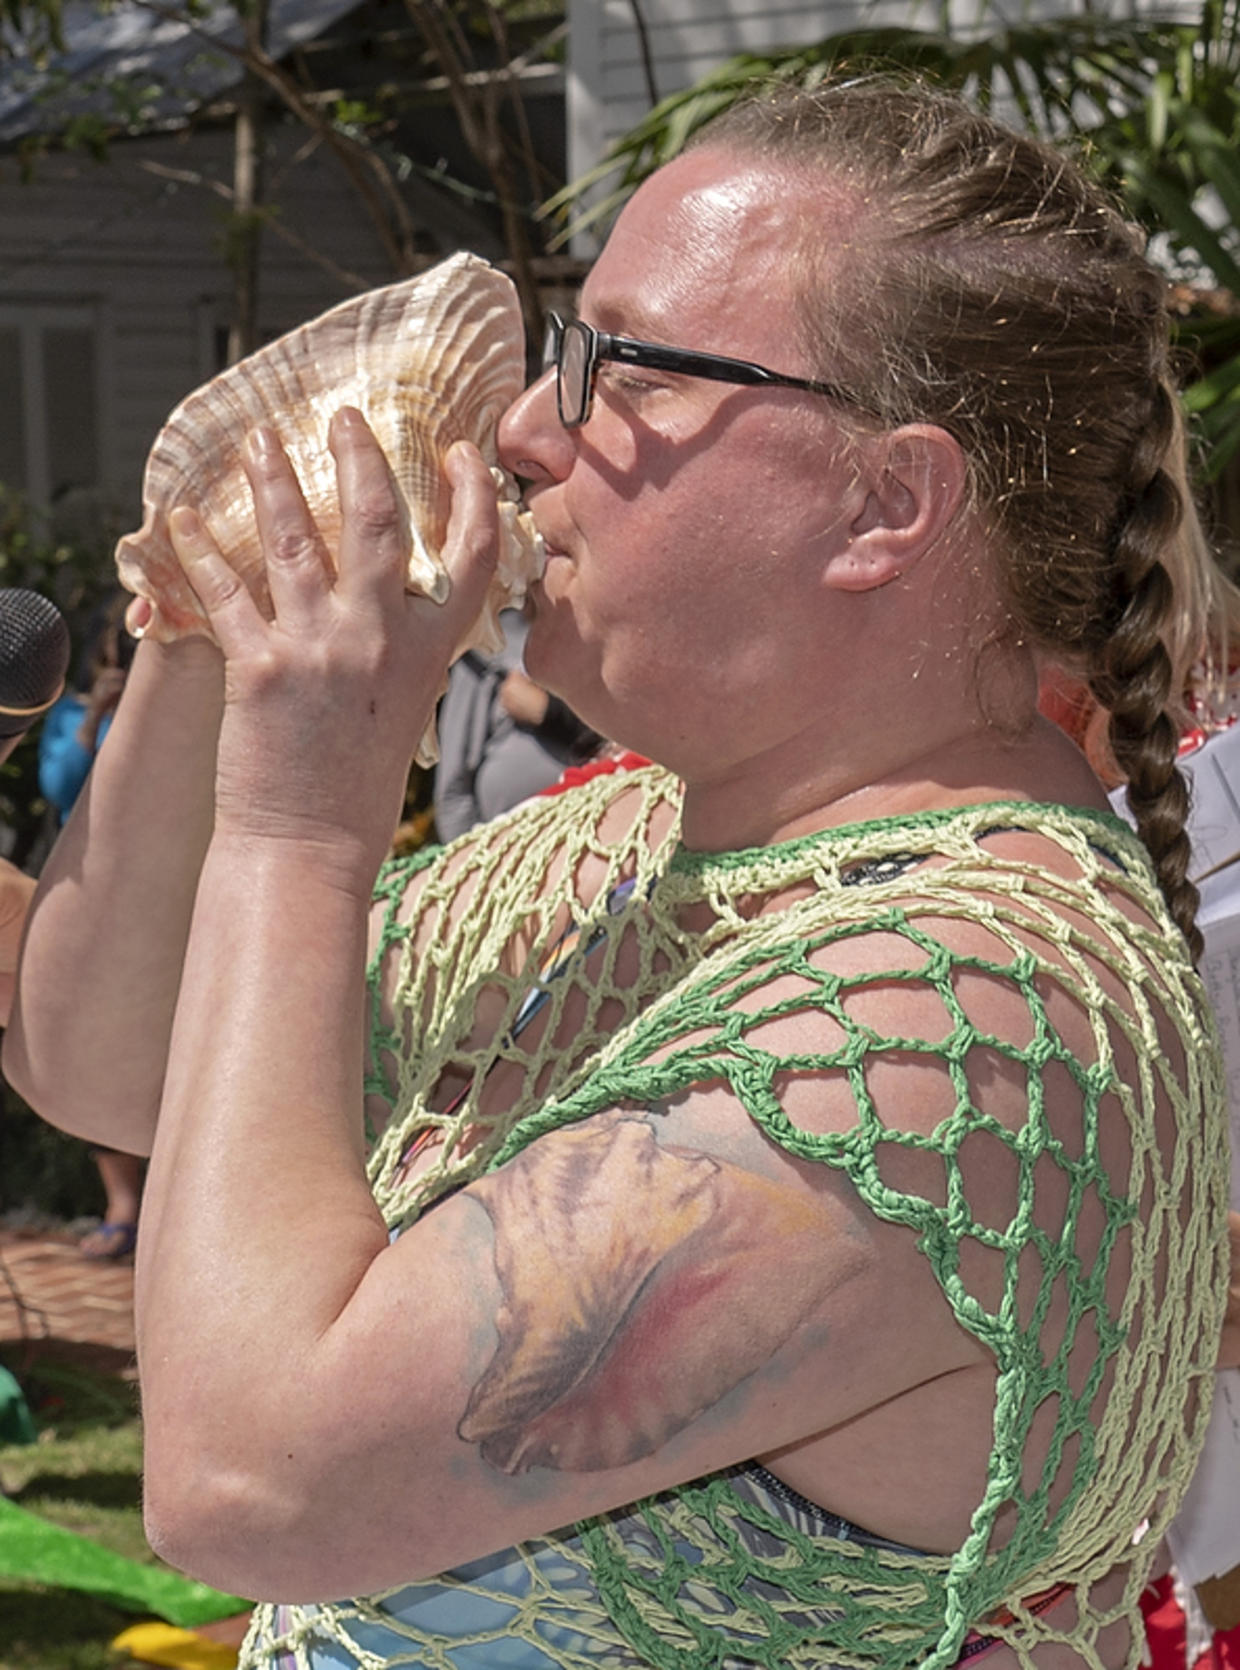 Canadian 'Pucker Pro' Wins Key West's Conch Shell Blowing Contest CBS